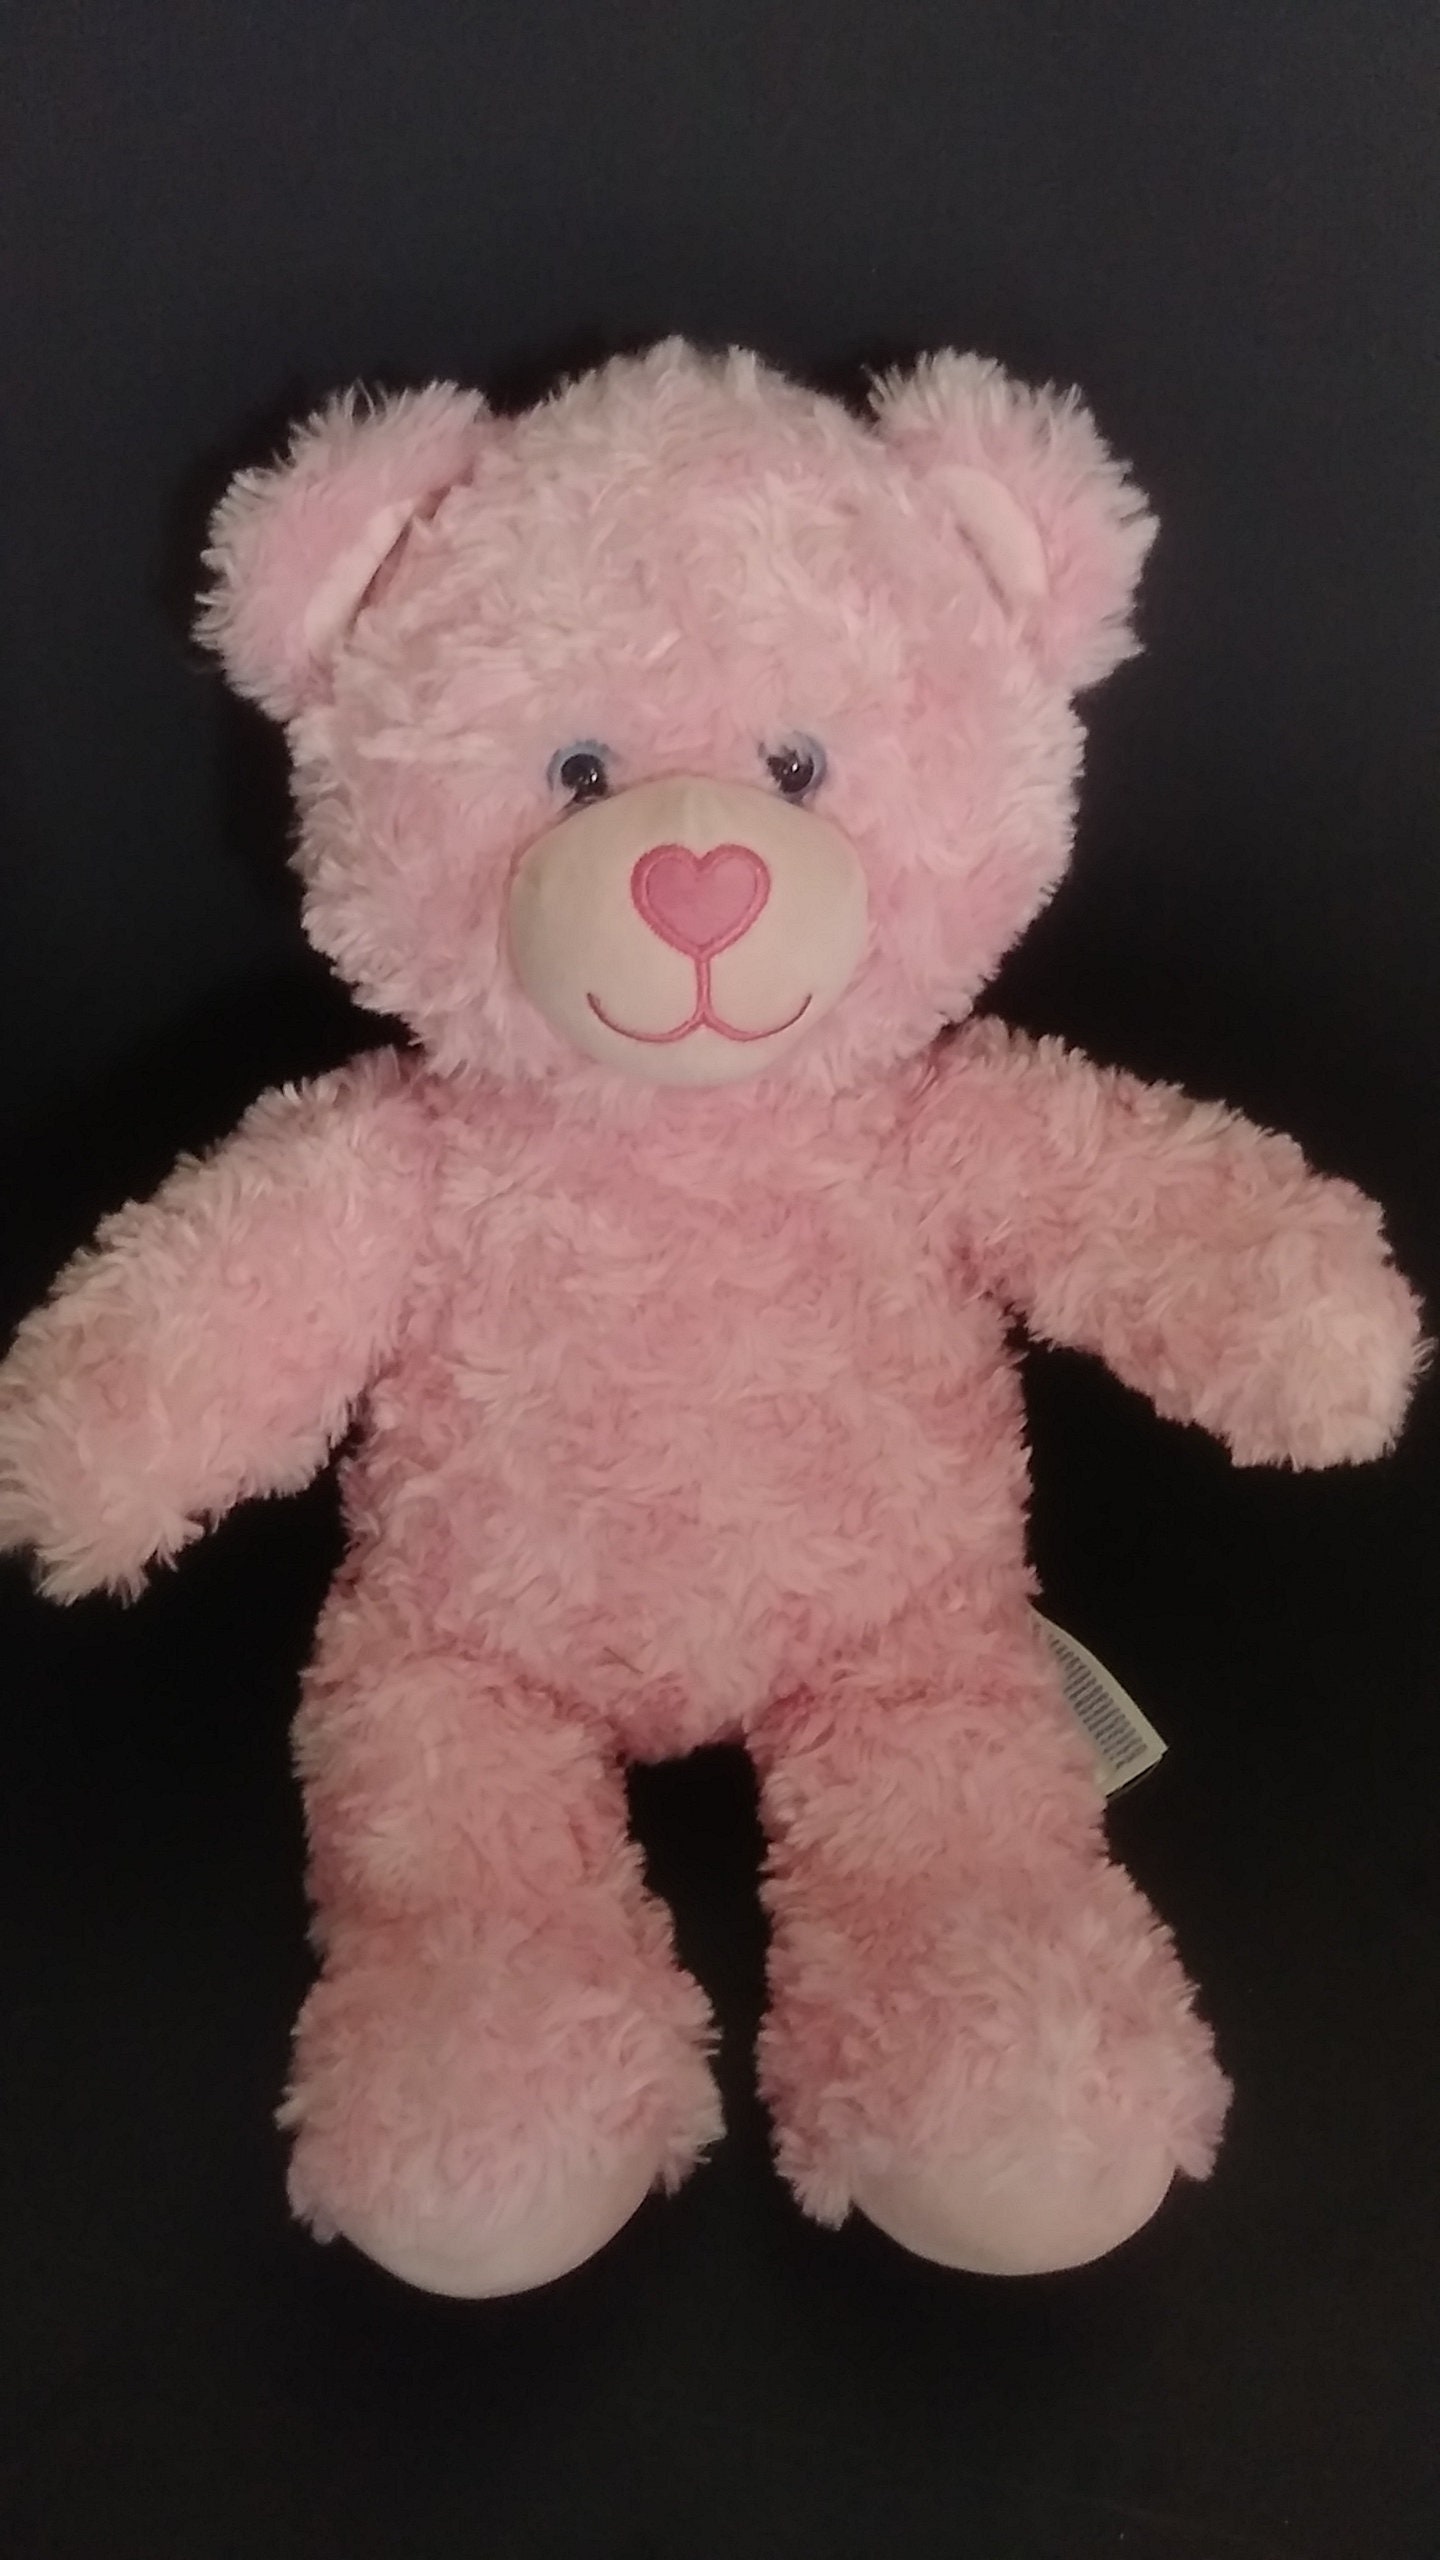 Build a Bear Workshop DARLING DOGGY PINK 15" Plush Stuffed Animal Toy Details about   BABW